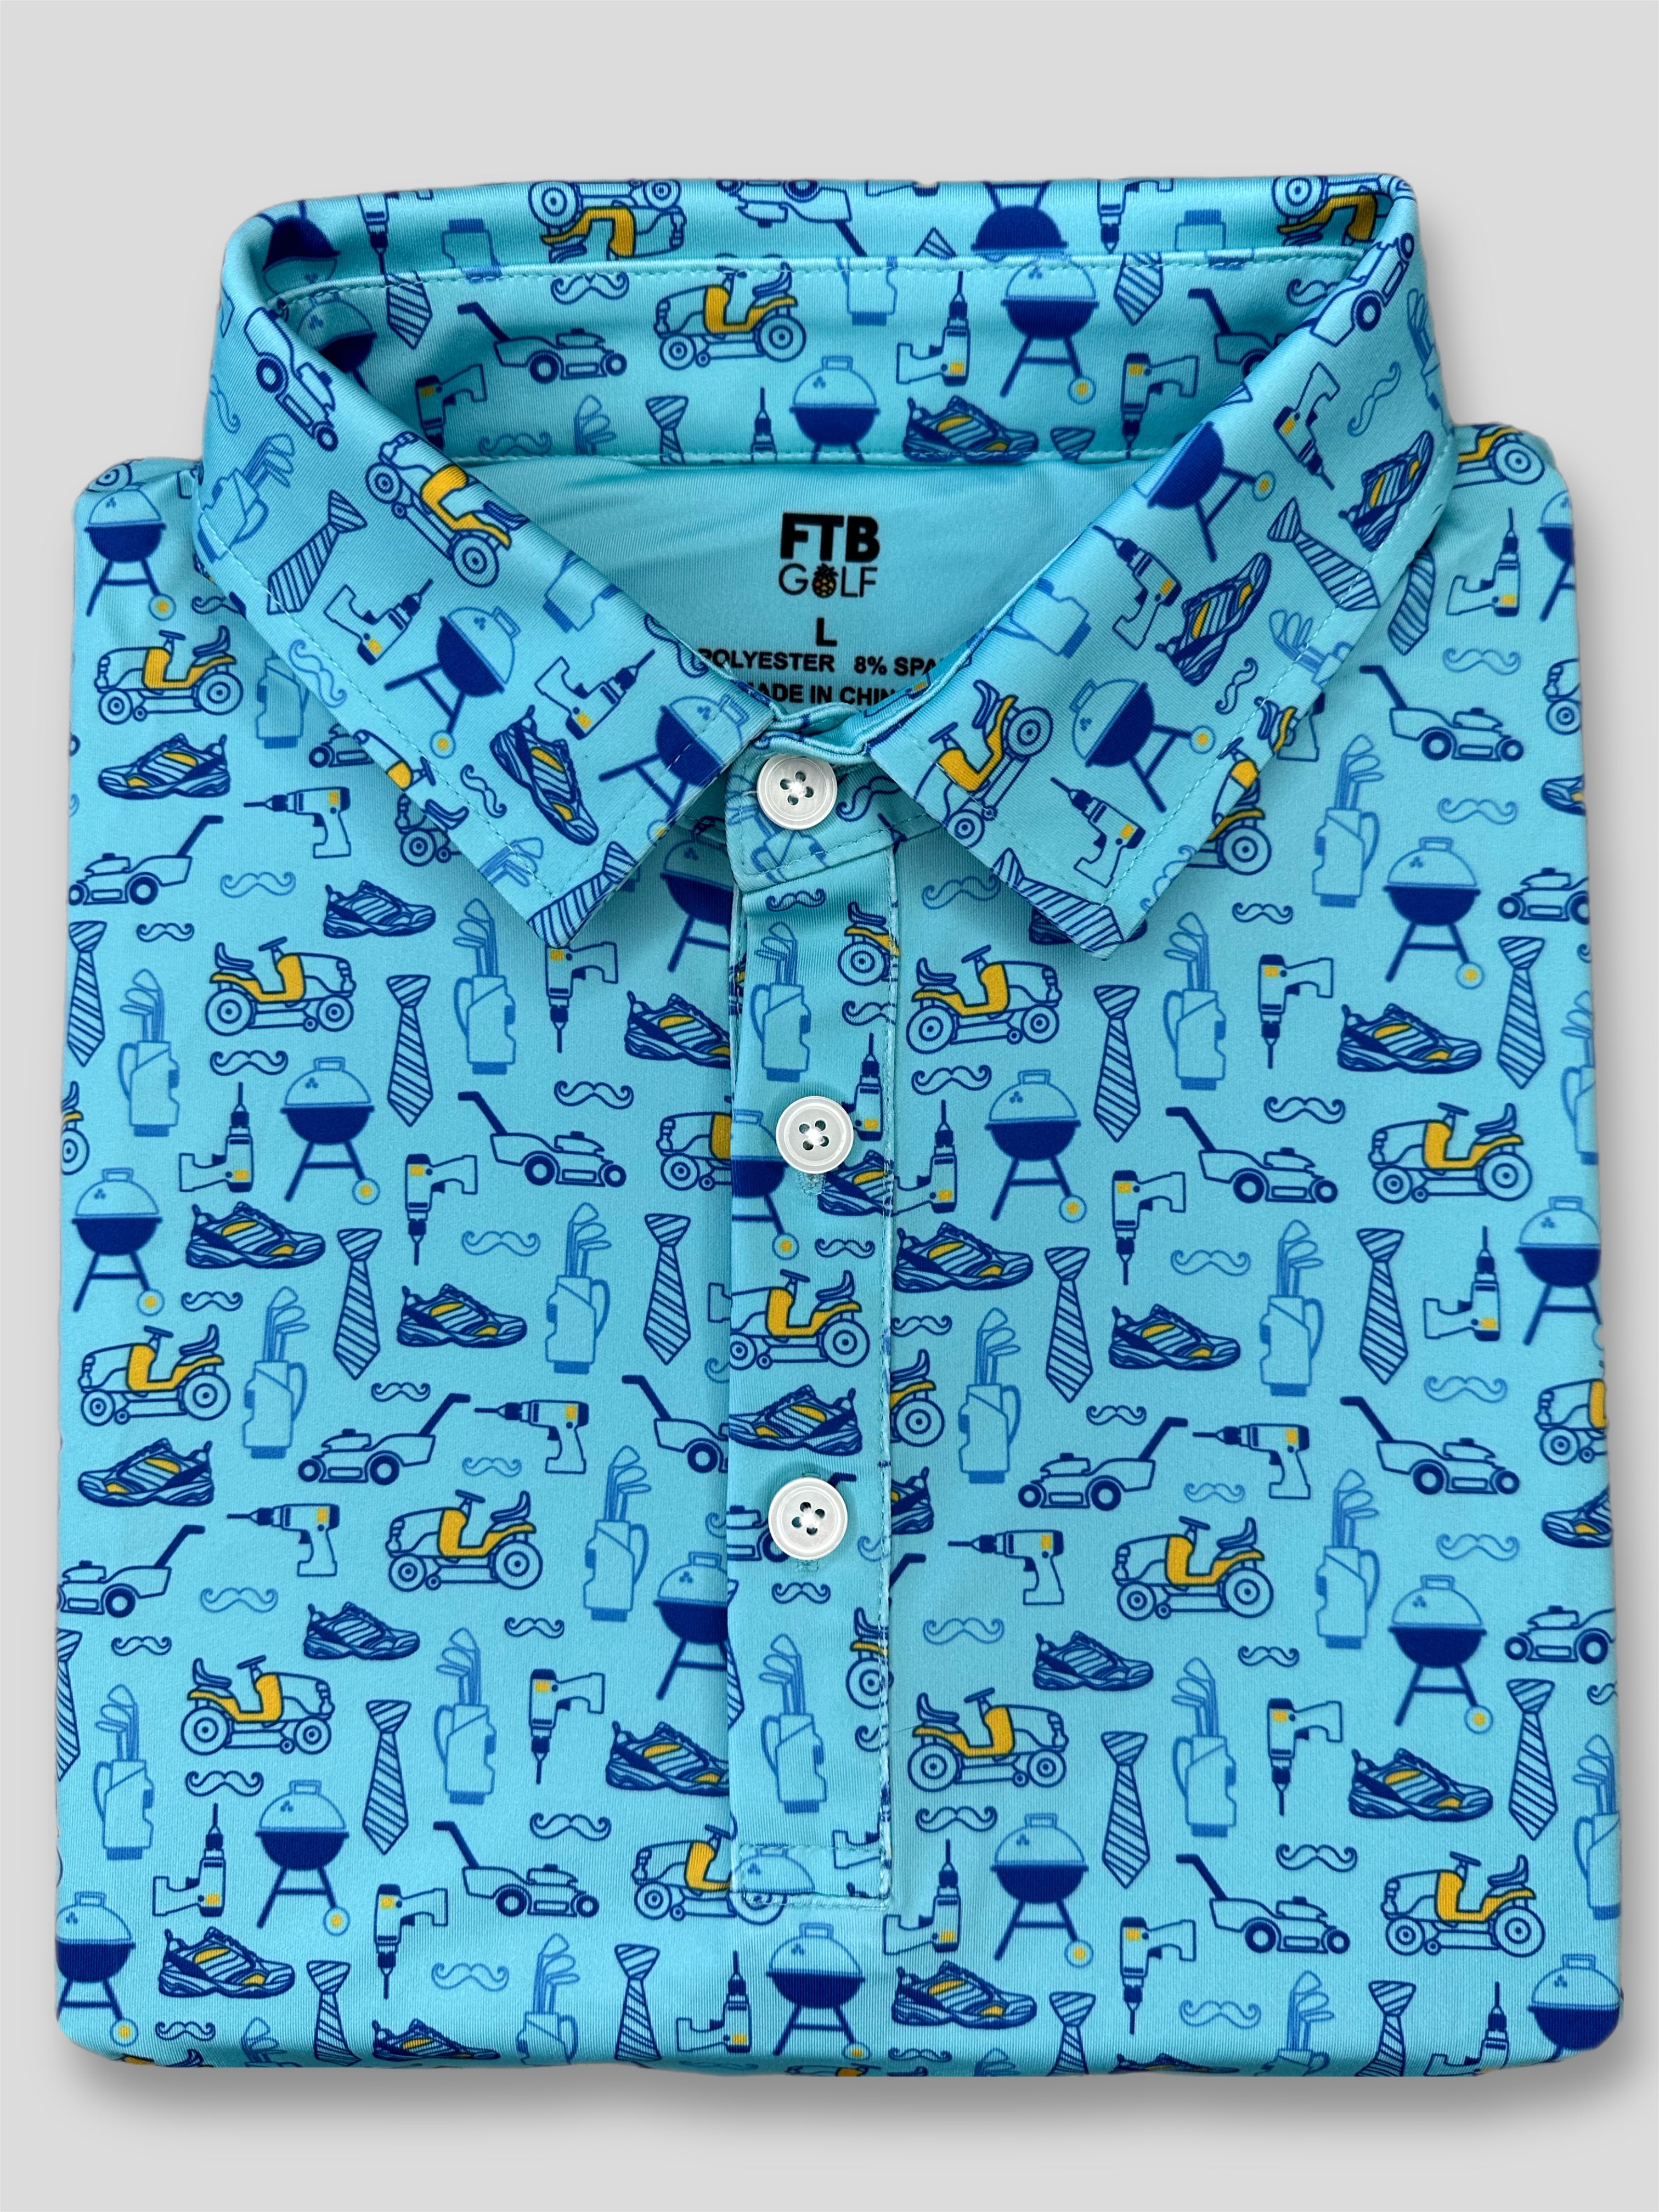 Father’s Day dad themed golf polo from FTB golf 